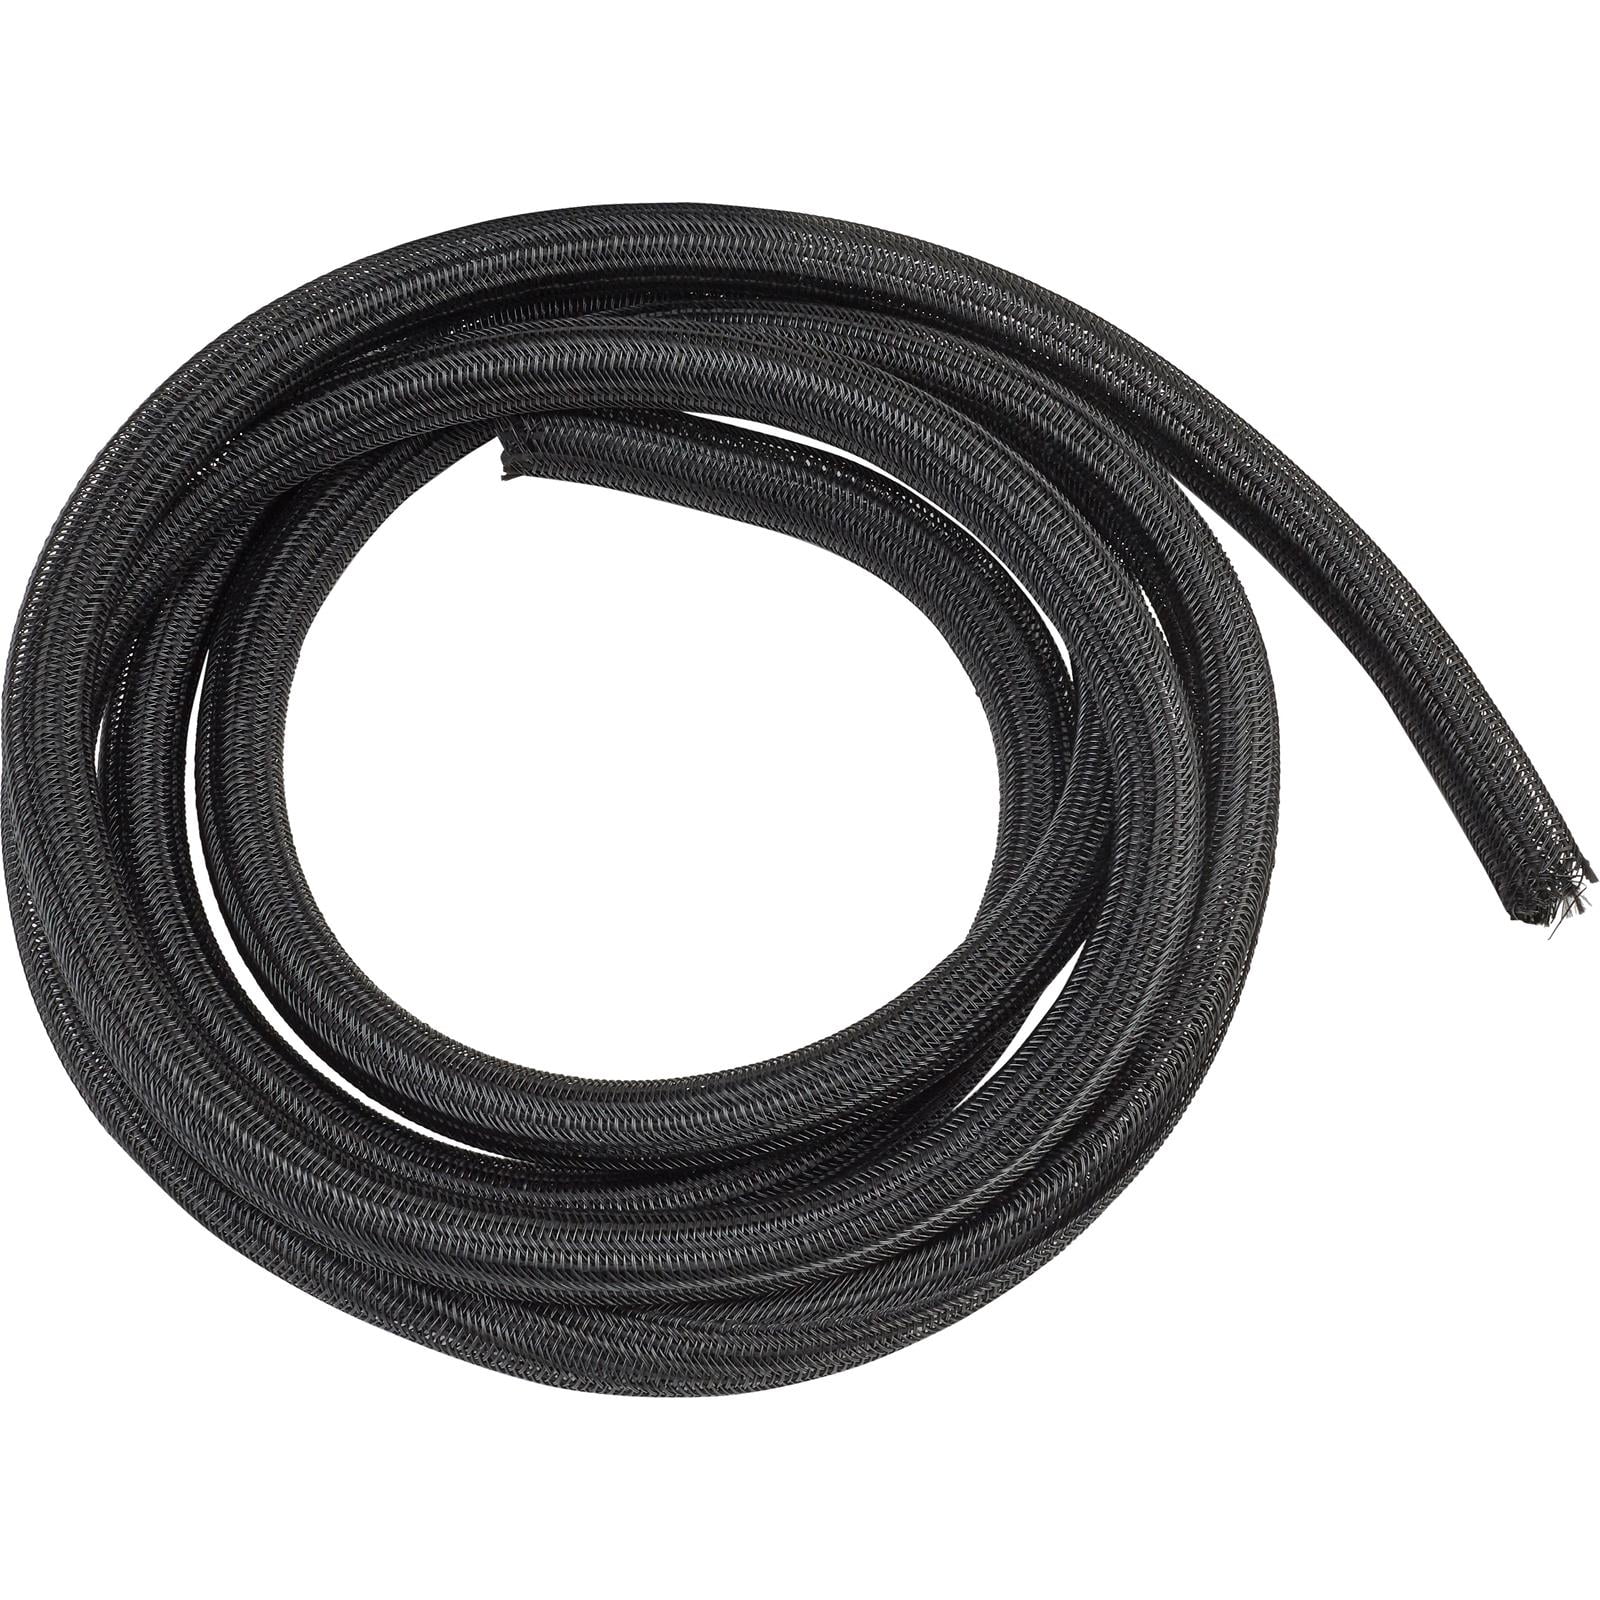 Buy Split Braided Wire Sleeve - 4X4 & Off-Road Parts